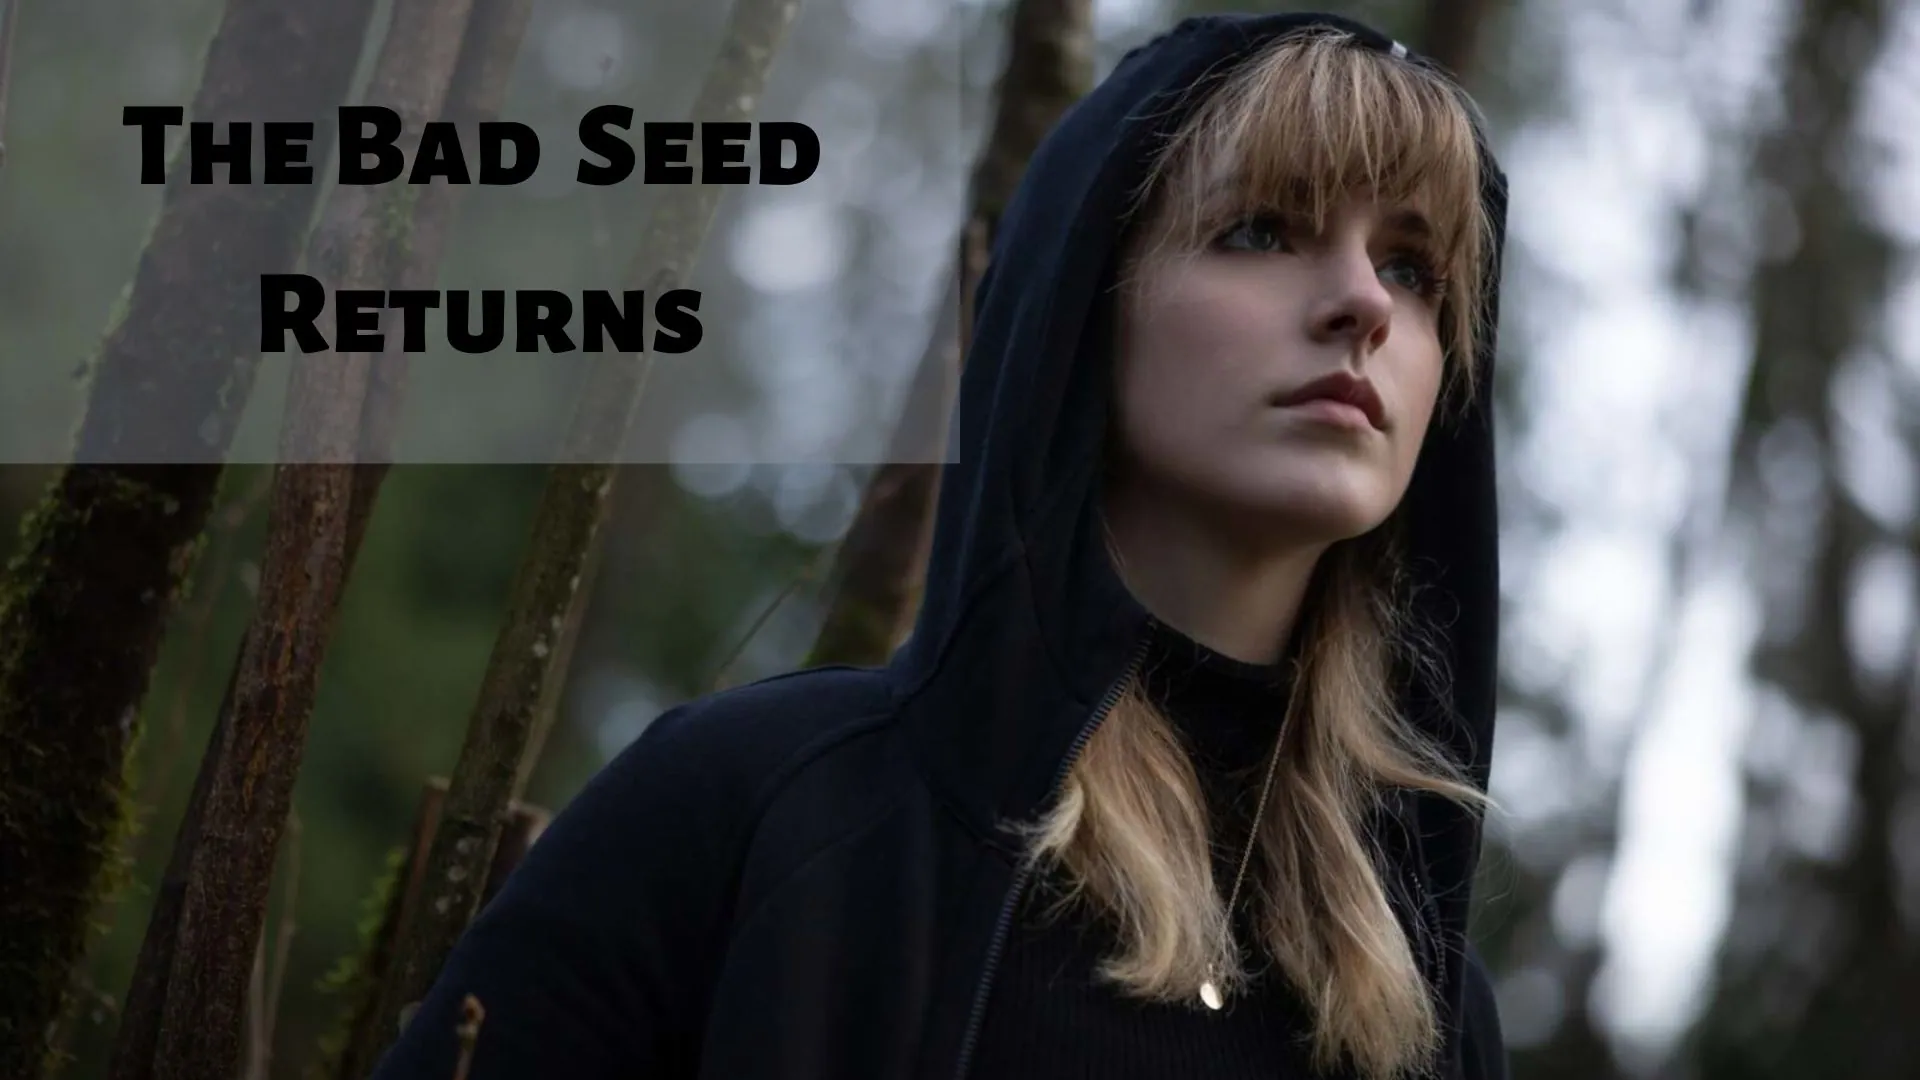 The Bad Seed Returns Parents Guide | Age Rating (2022)